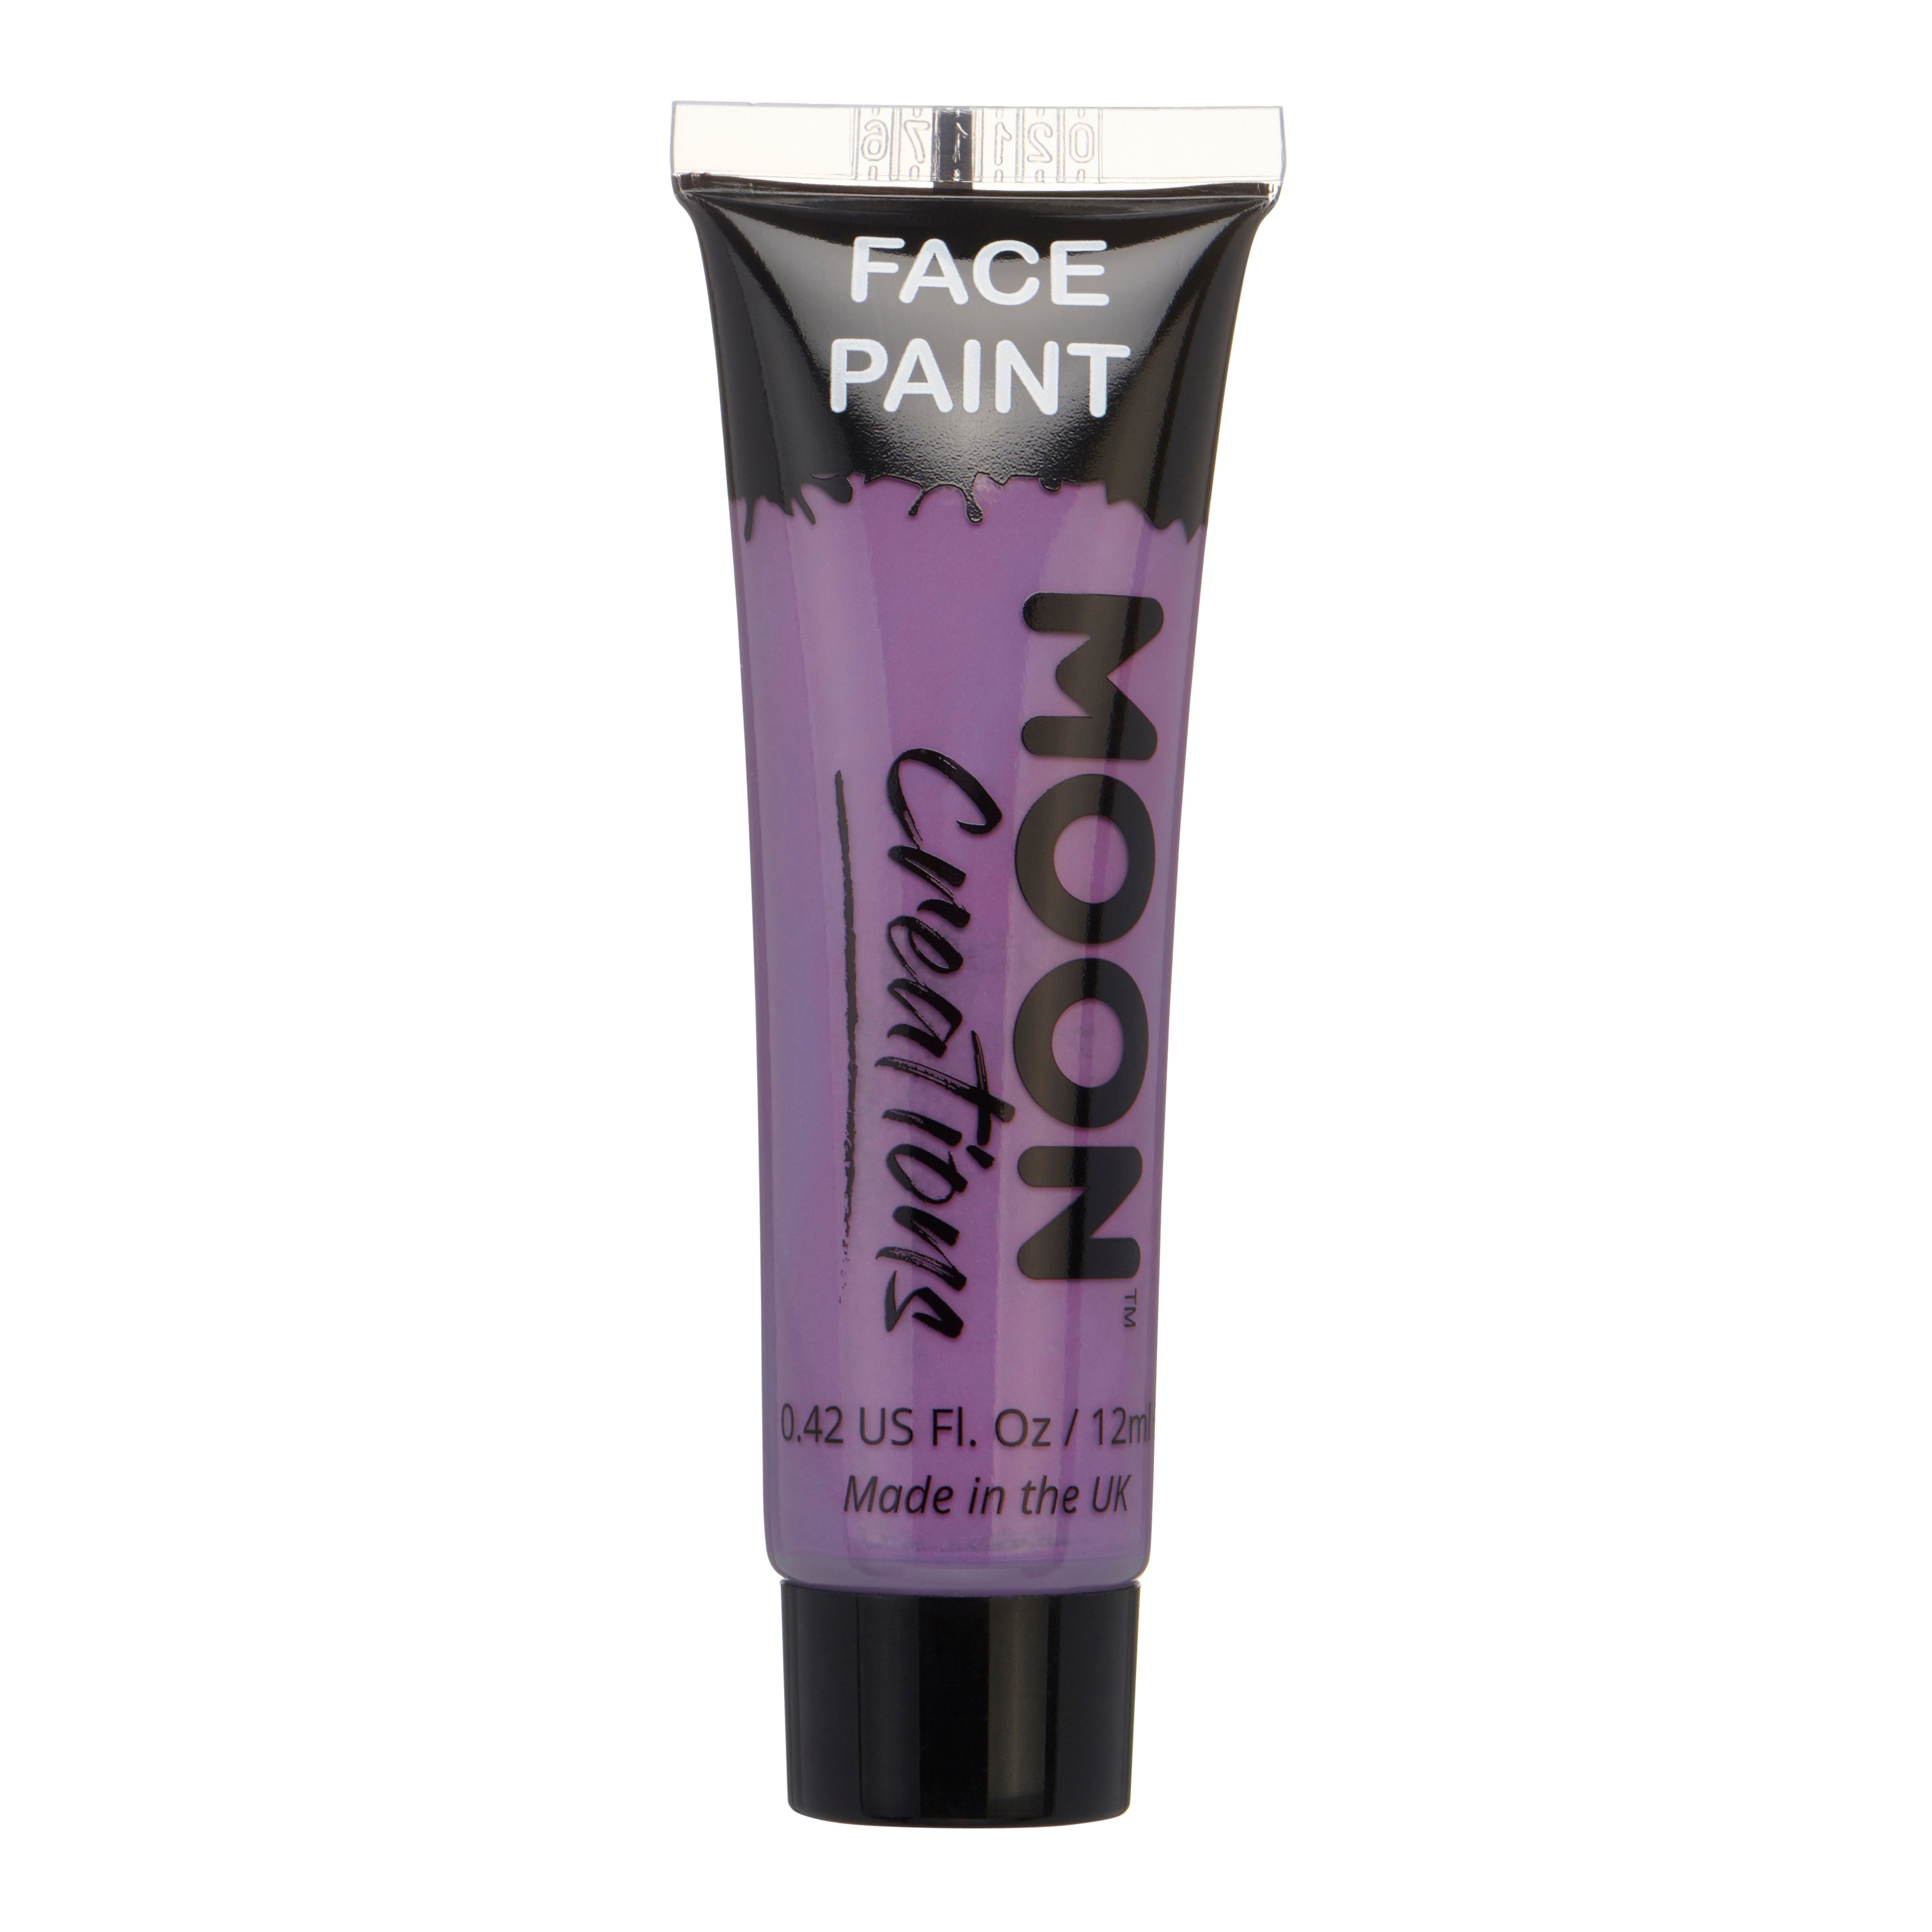 Purple - Face & Body Paint Makeup, 12mL. Cosmetically certified, FDA & Health Canada compliant, cruelty free and vegan.